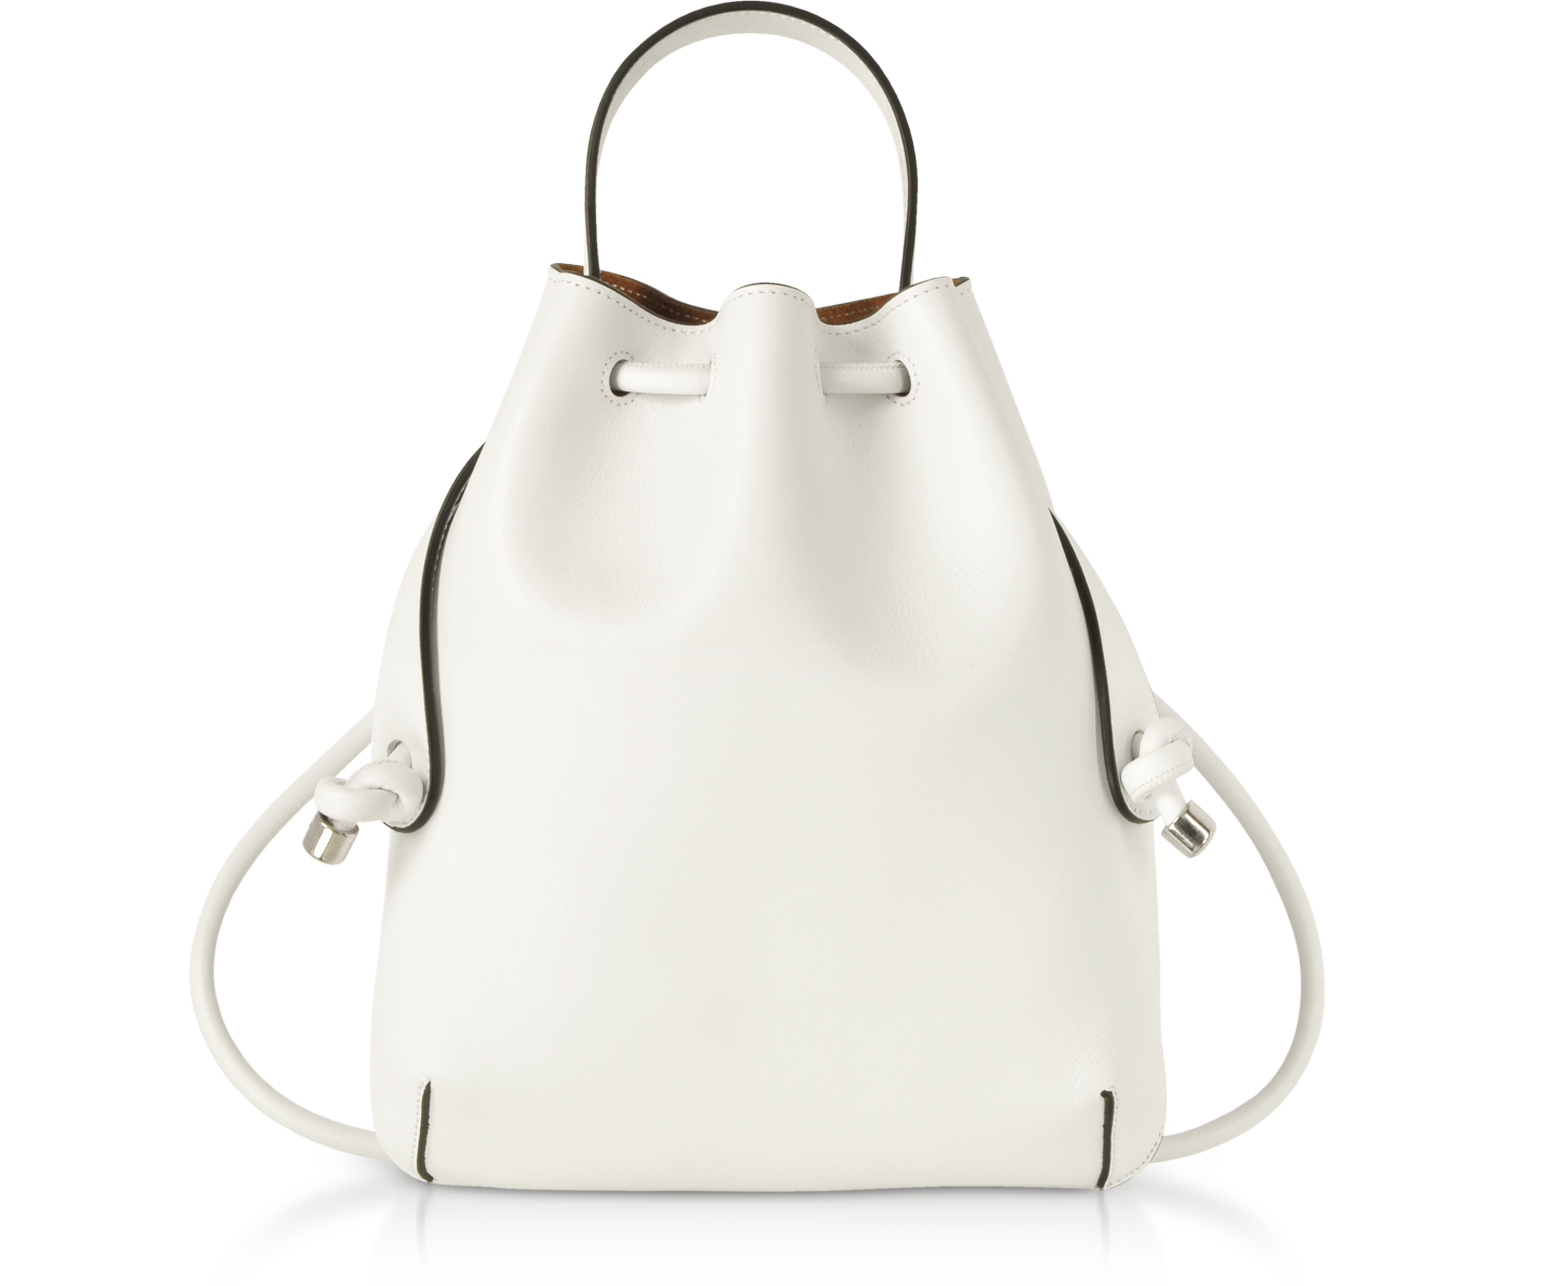 Meli-Melo Briony Mini Backpack crafted in nappa leather balances